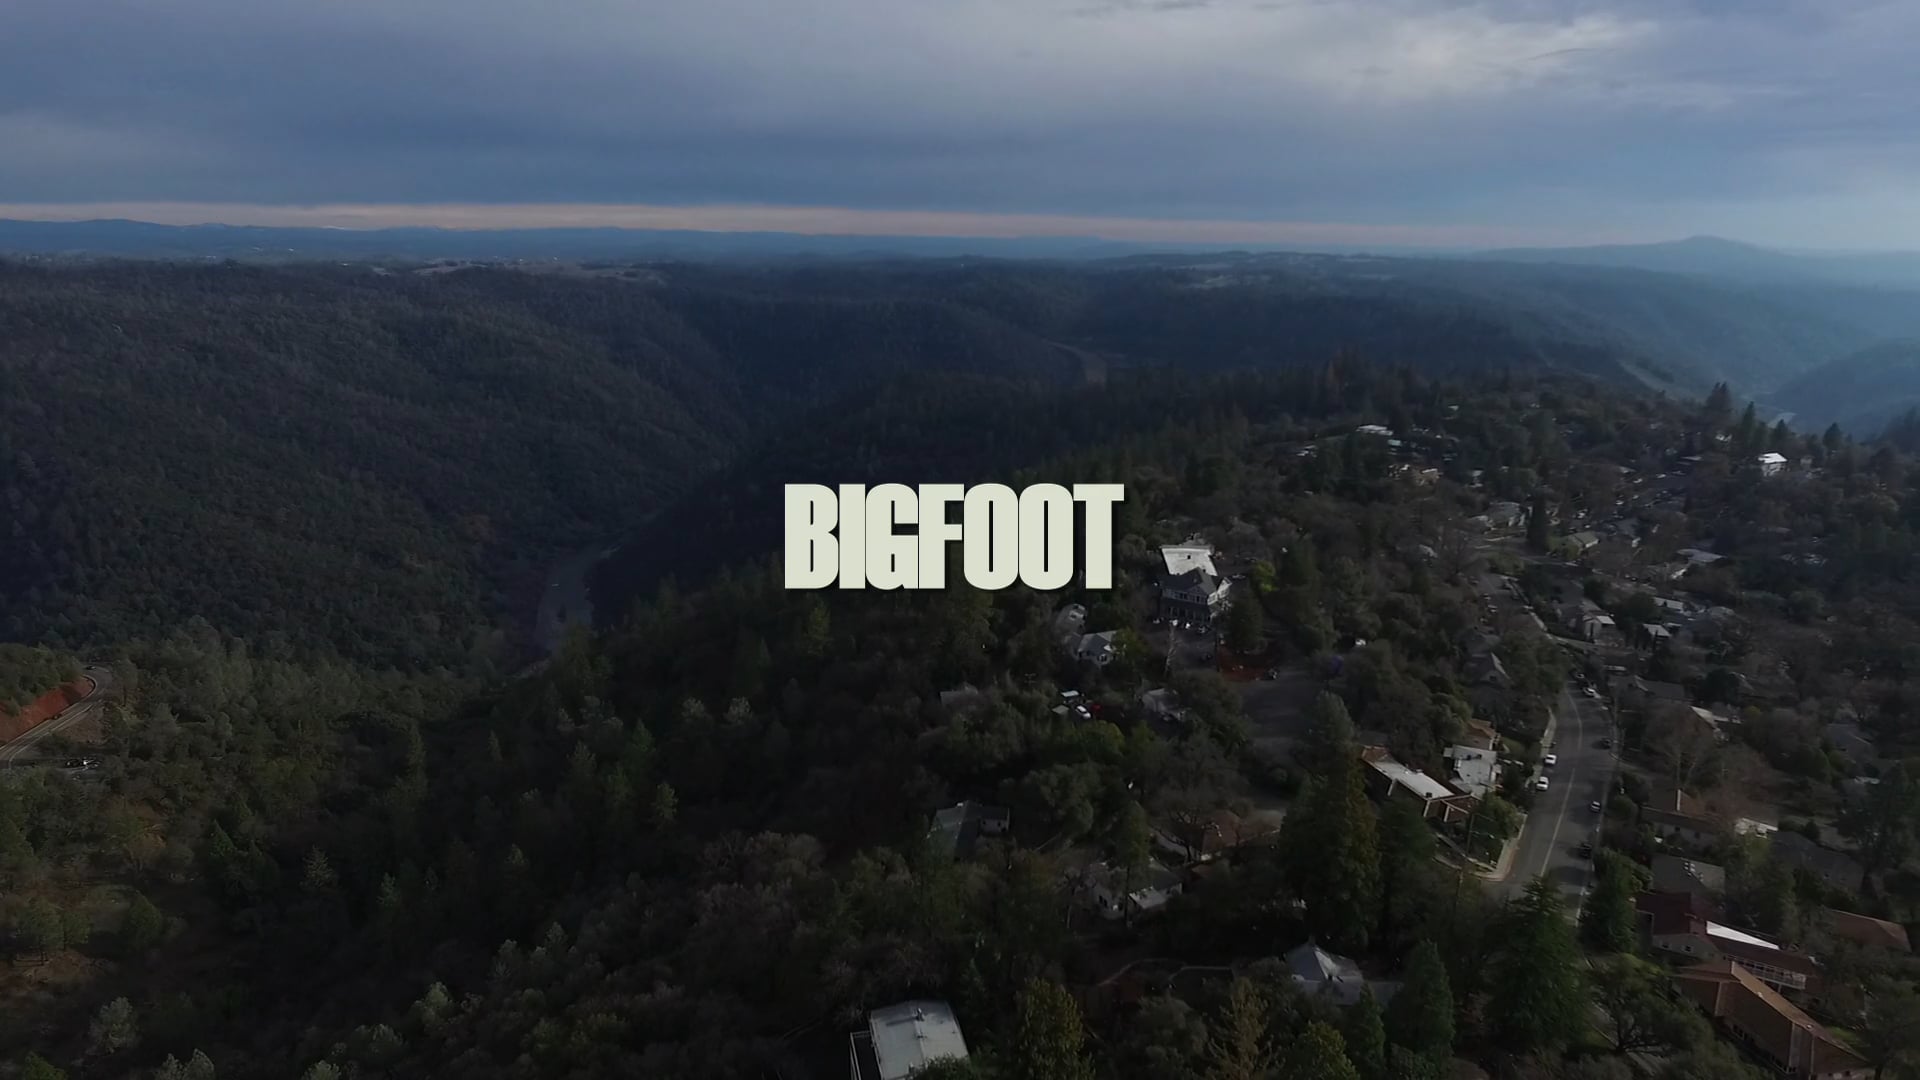 The Opening to DiCaprio's Next Movie, 'Bigfoot'